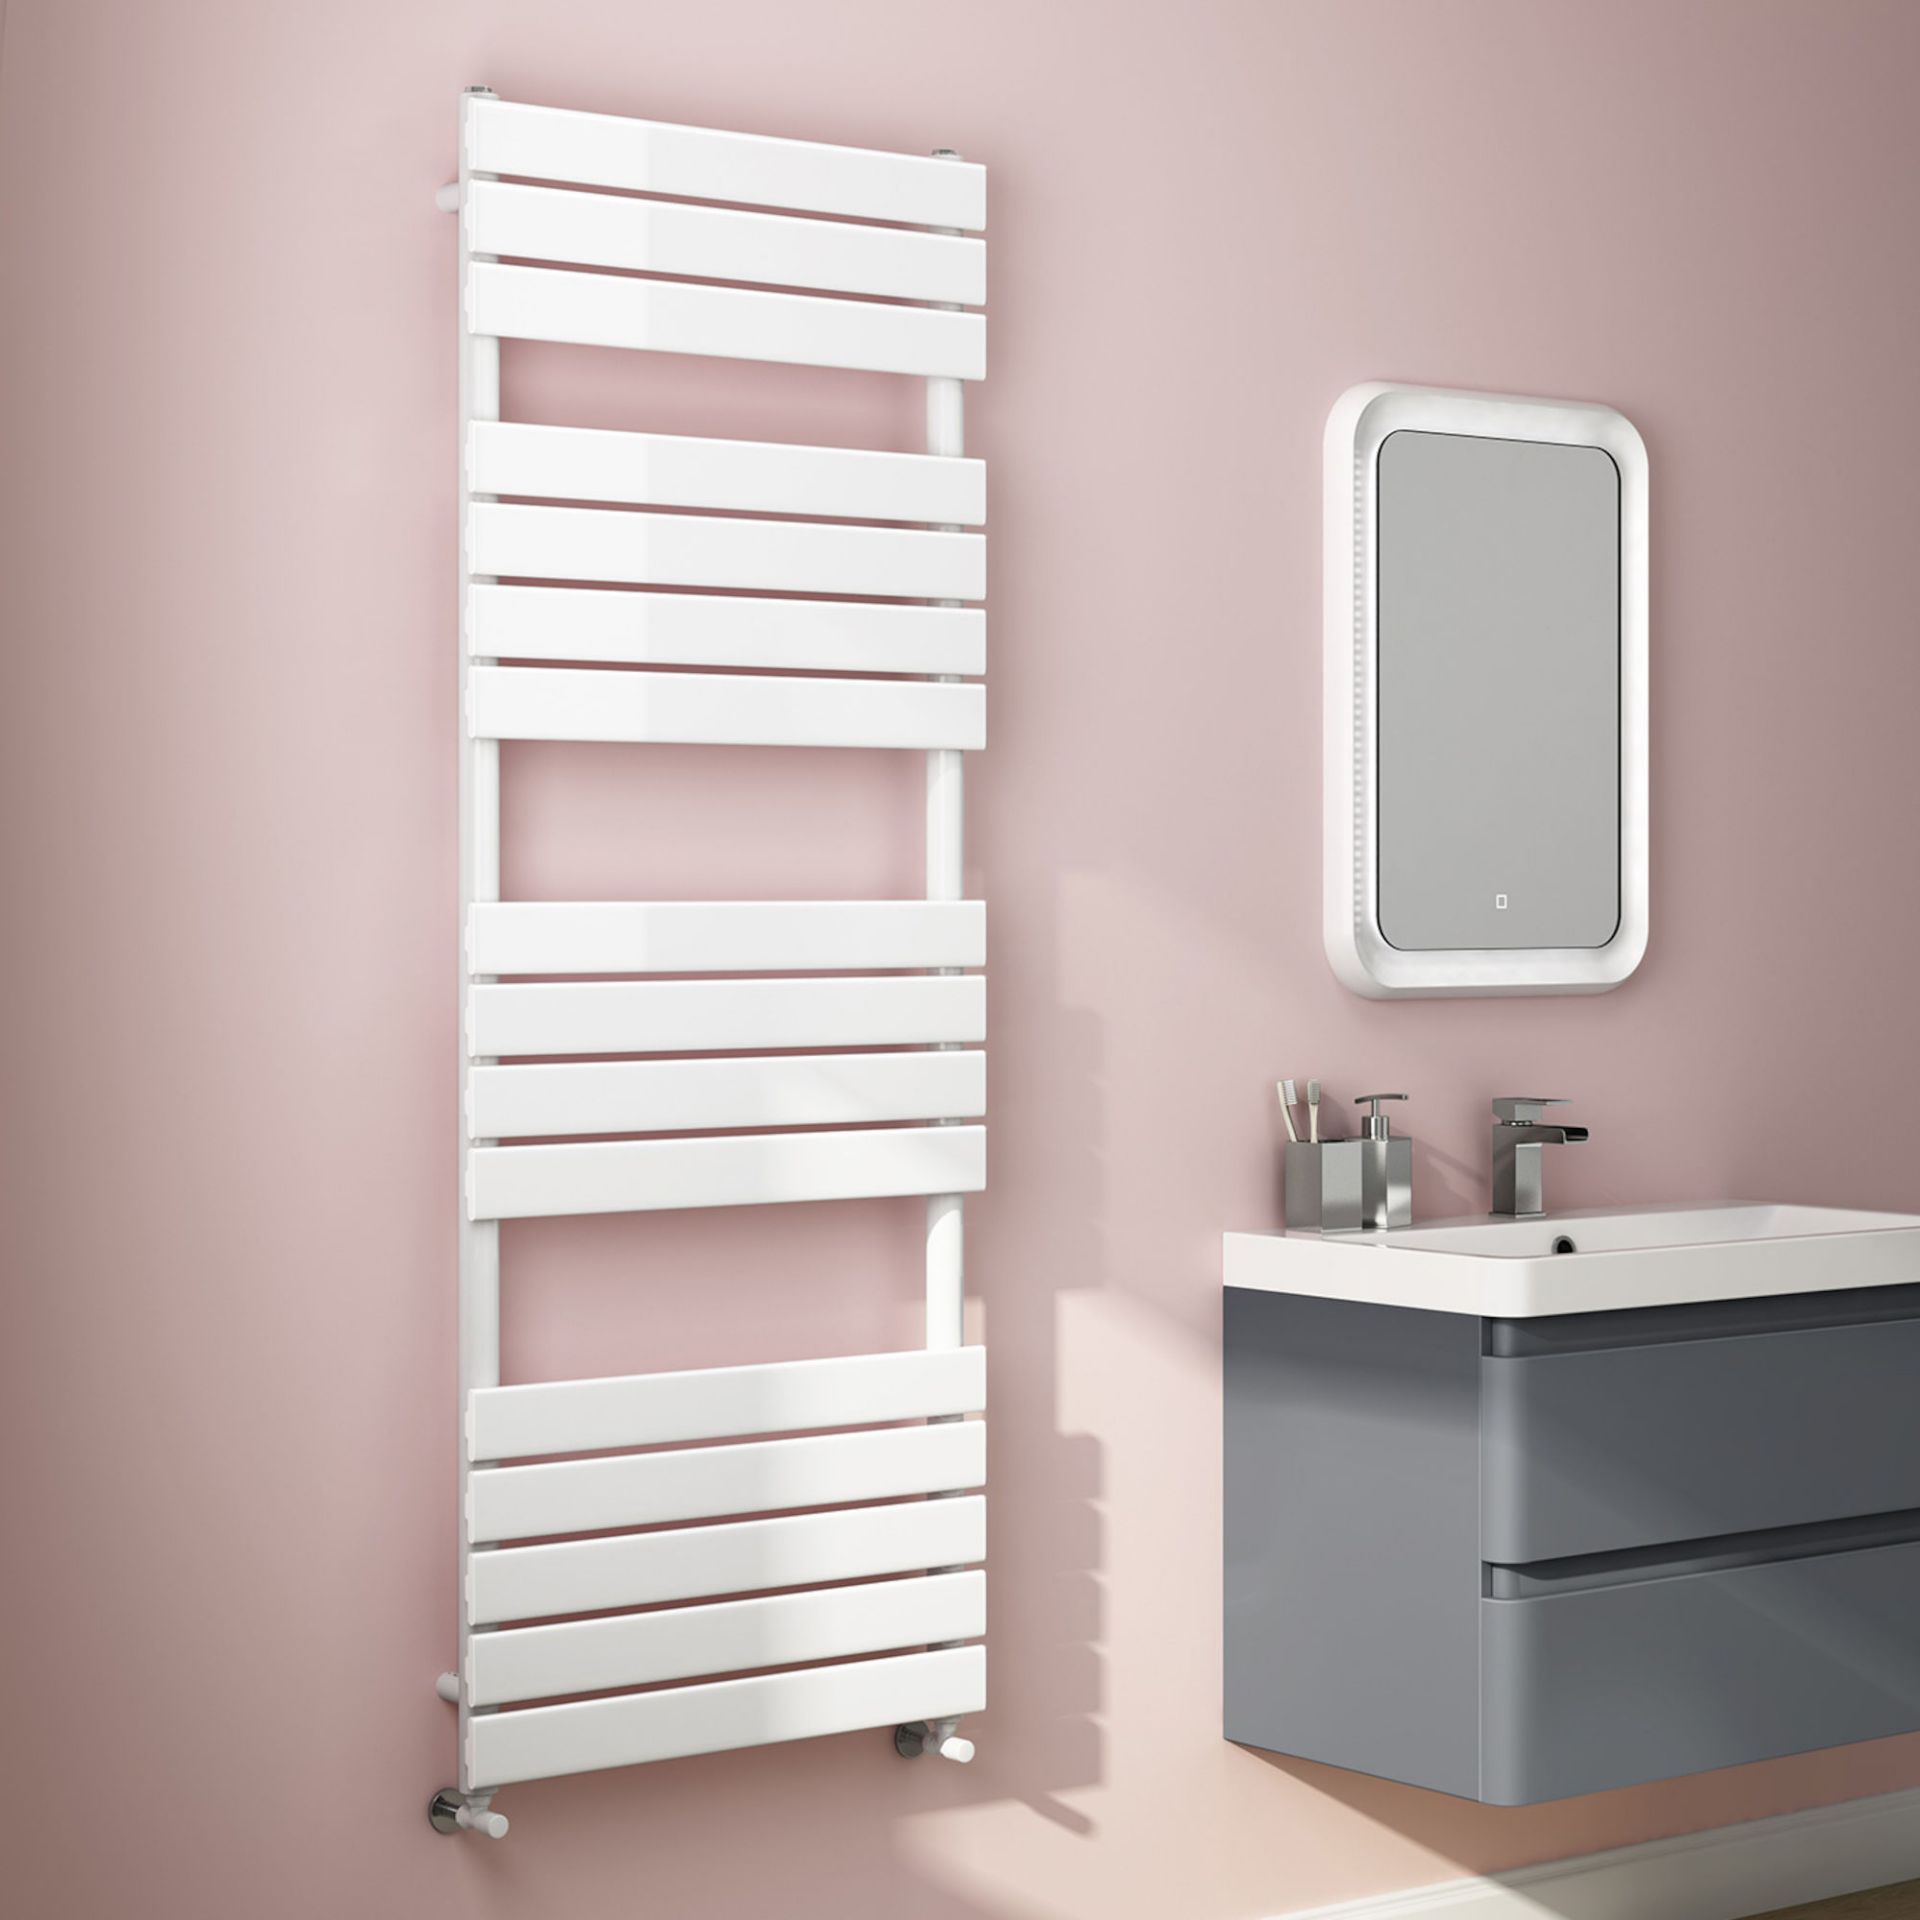 (ZL85) 1600x600mm White Flat Panel Ladder Towel Radiator. RRP £349.99. Made from low carbon steel